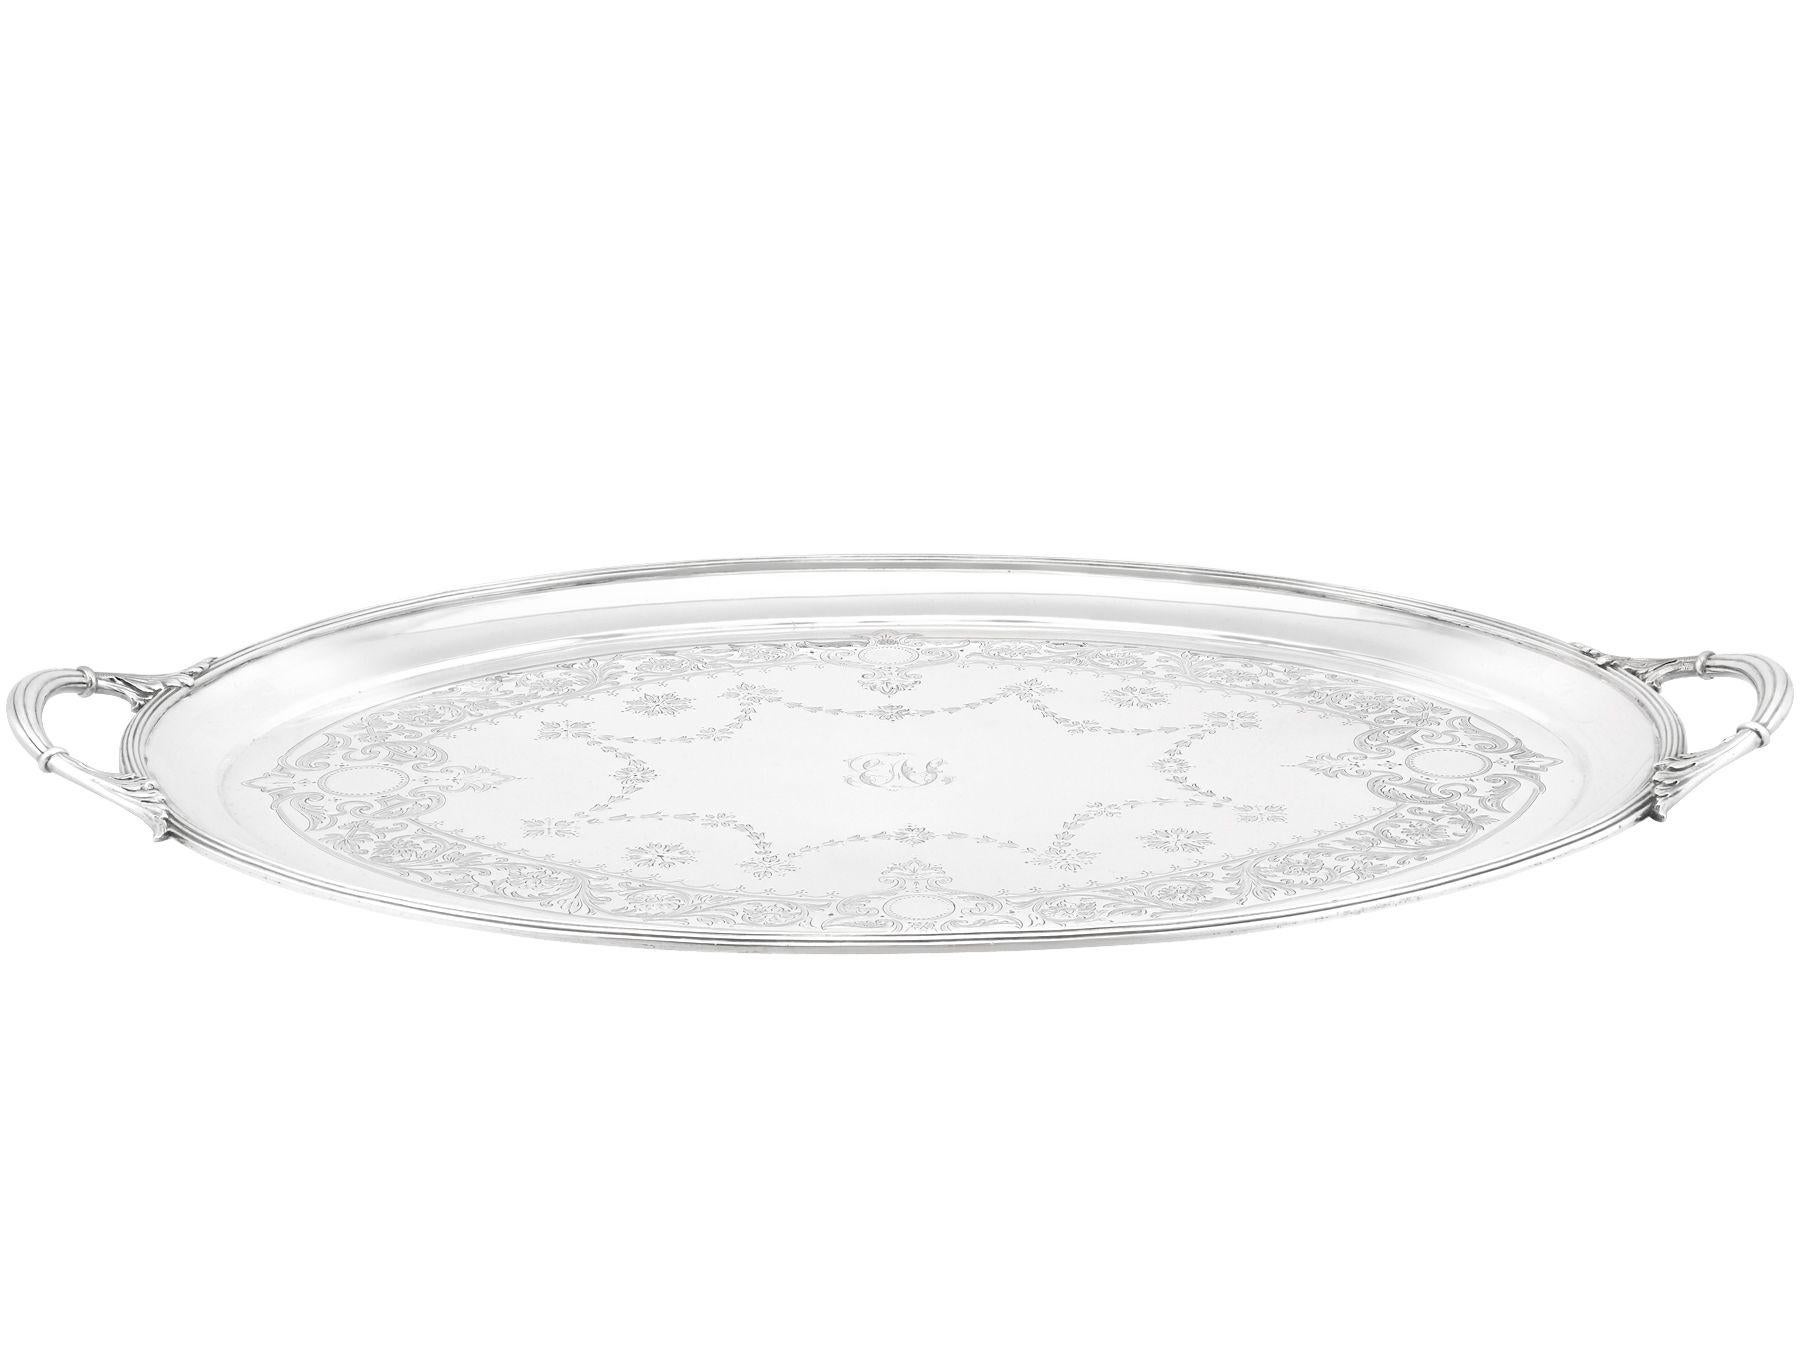 An exceptional, fine and impressive antique Victorian English sterling silver engraved tea tray made by Walter & John Barnard; an addition to our silver tray collection.

This exceptional antique Victorian sterling silver tray has an oval form.

The